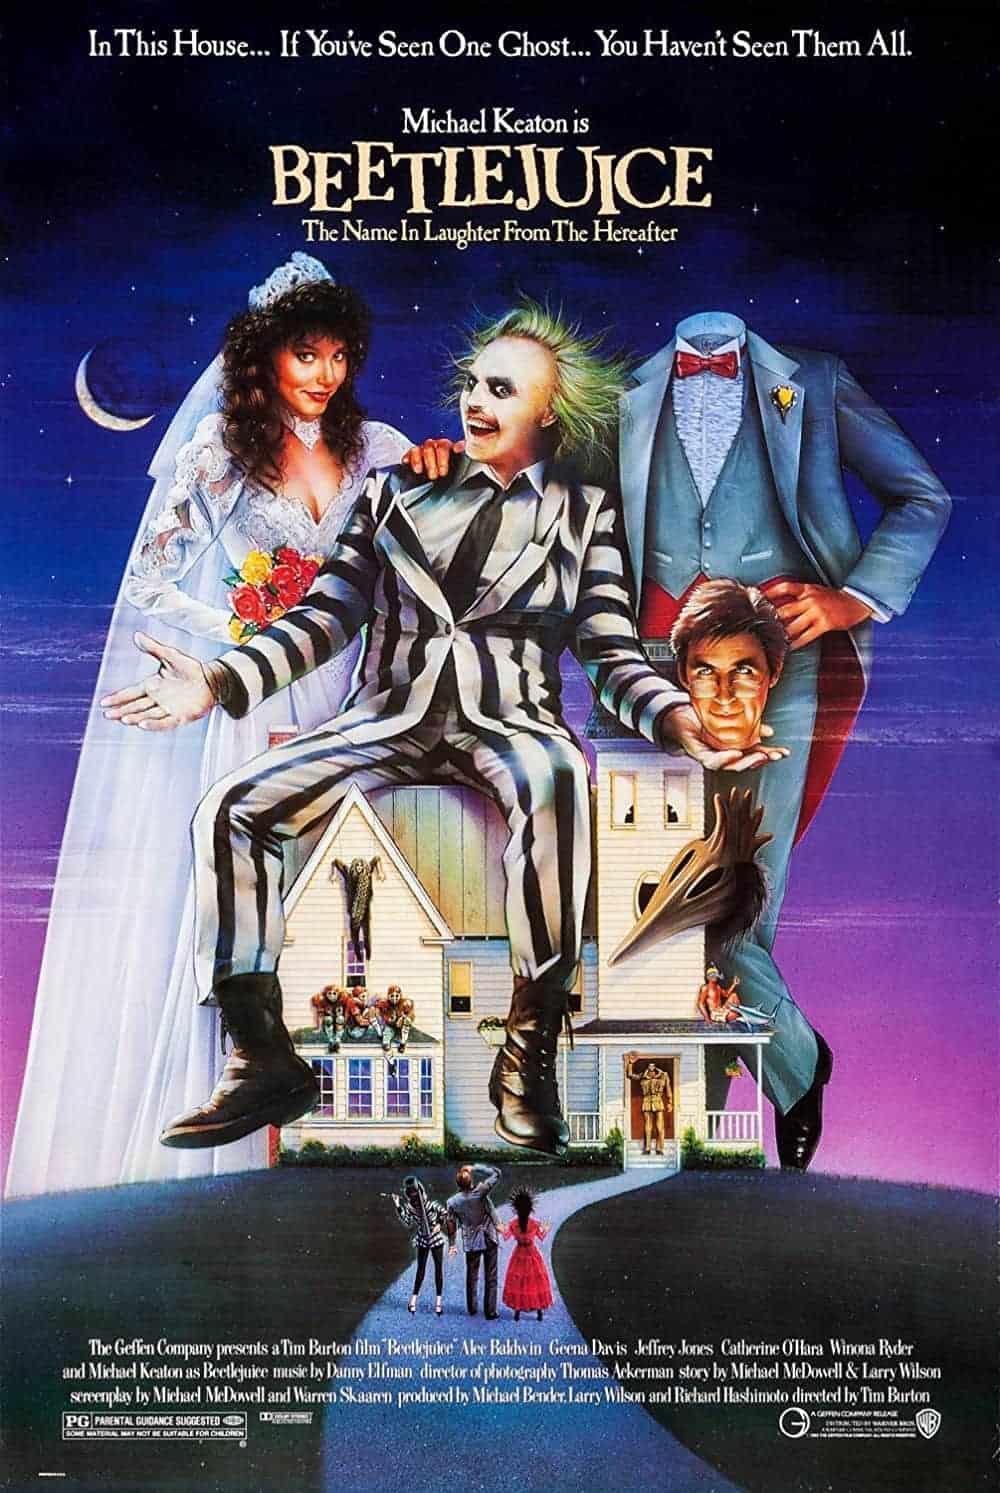 Beetlejuice (1988) Best Exorcism Movies You Can't Miss